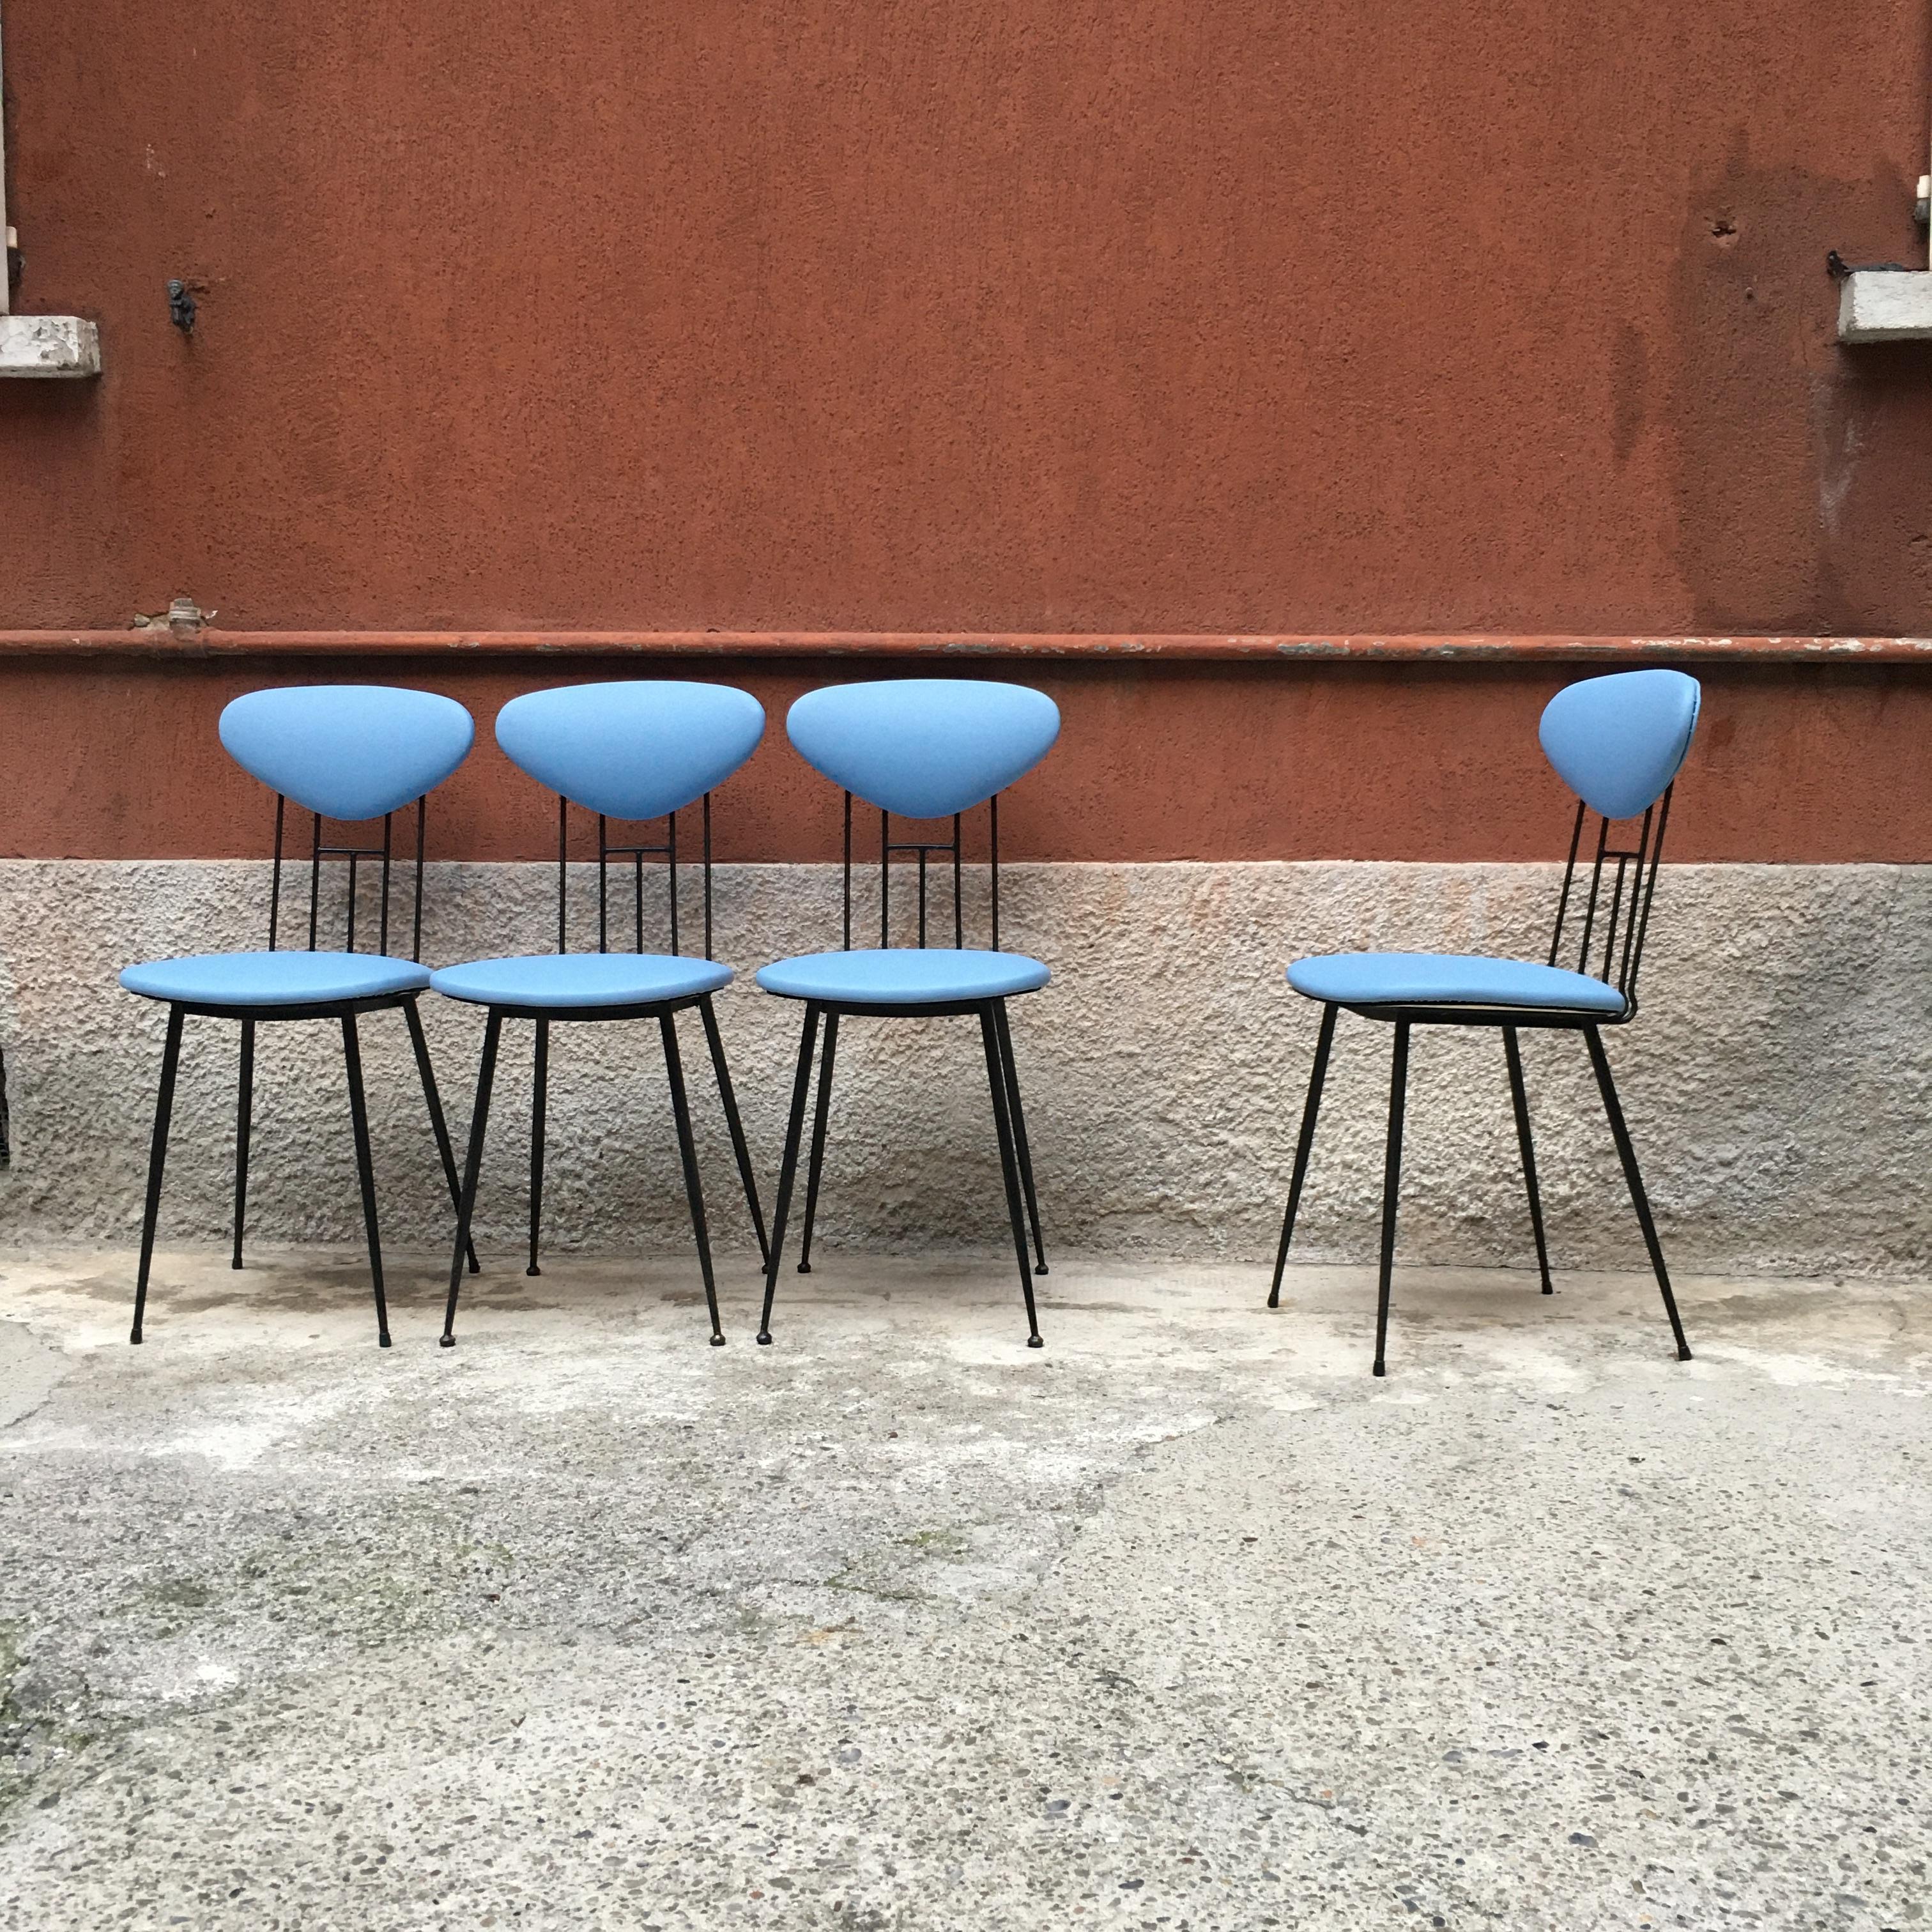 Italian light-blue leatherette and black metal chairs, 1980s
Chairs with structure in enameled metal rod and light-blue leatherette upholstered seat and backrest covered
Perfect conditions.